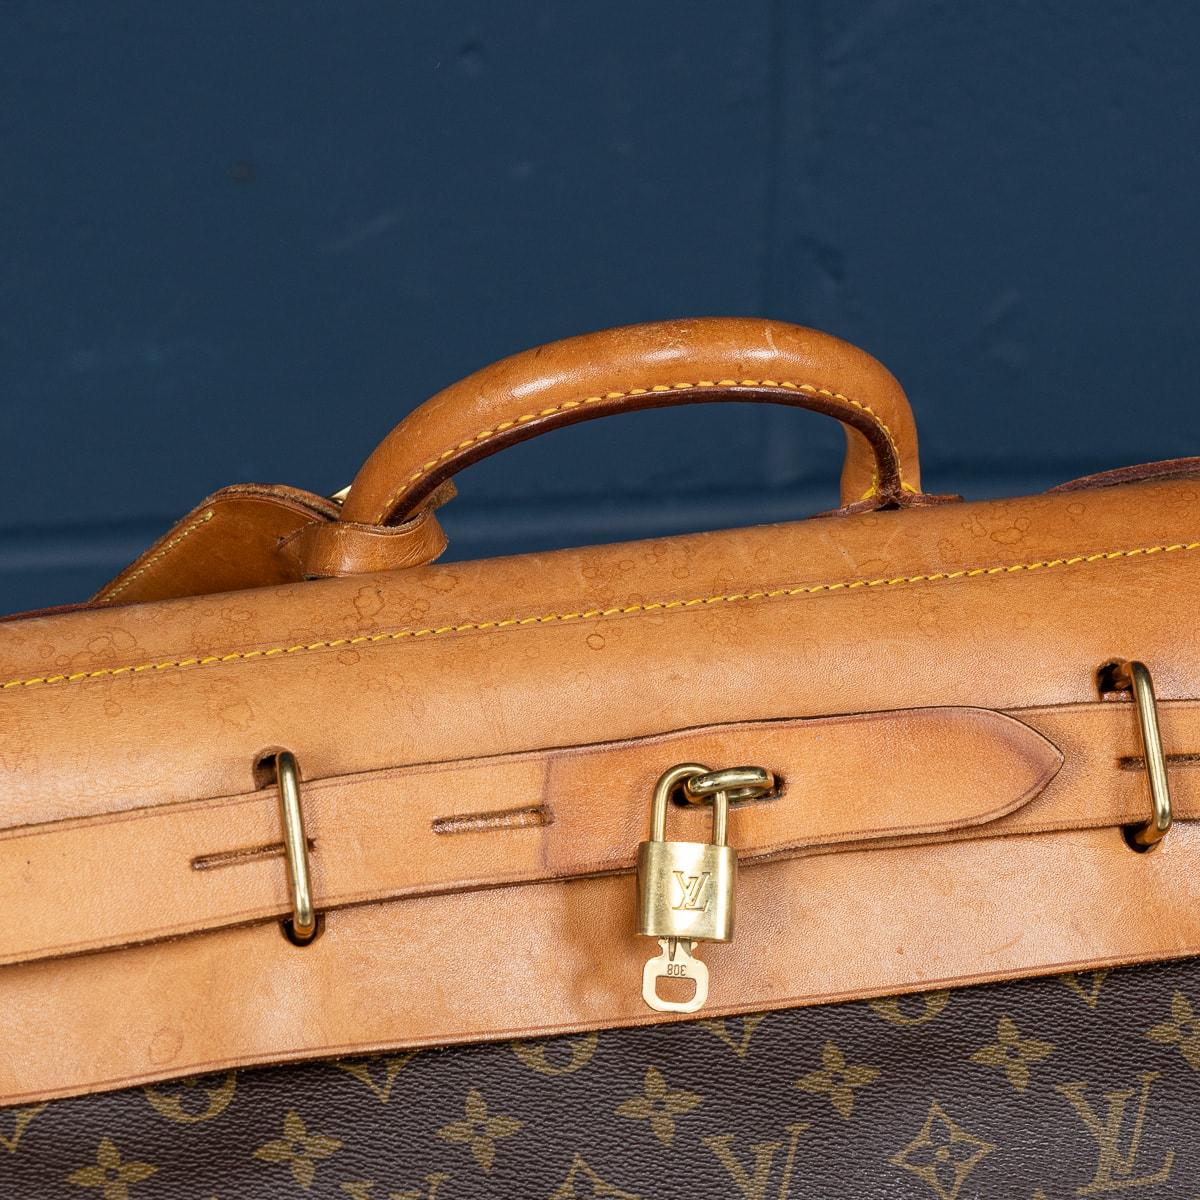 20th Century Louis Vuitton Steamer Bag In Monogram Canvas, Made In France For Sale 3